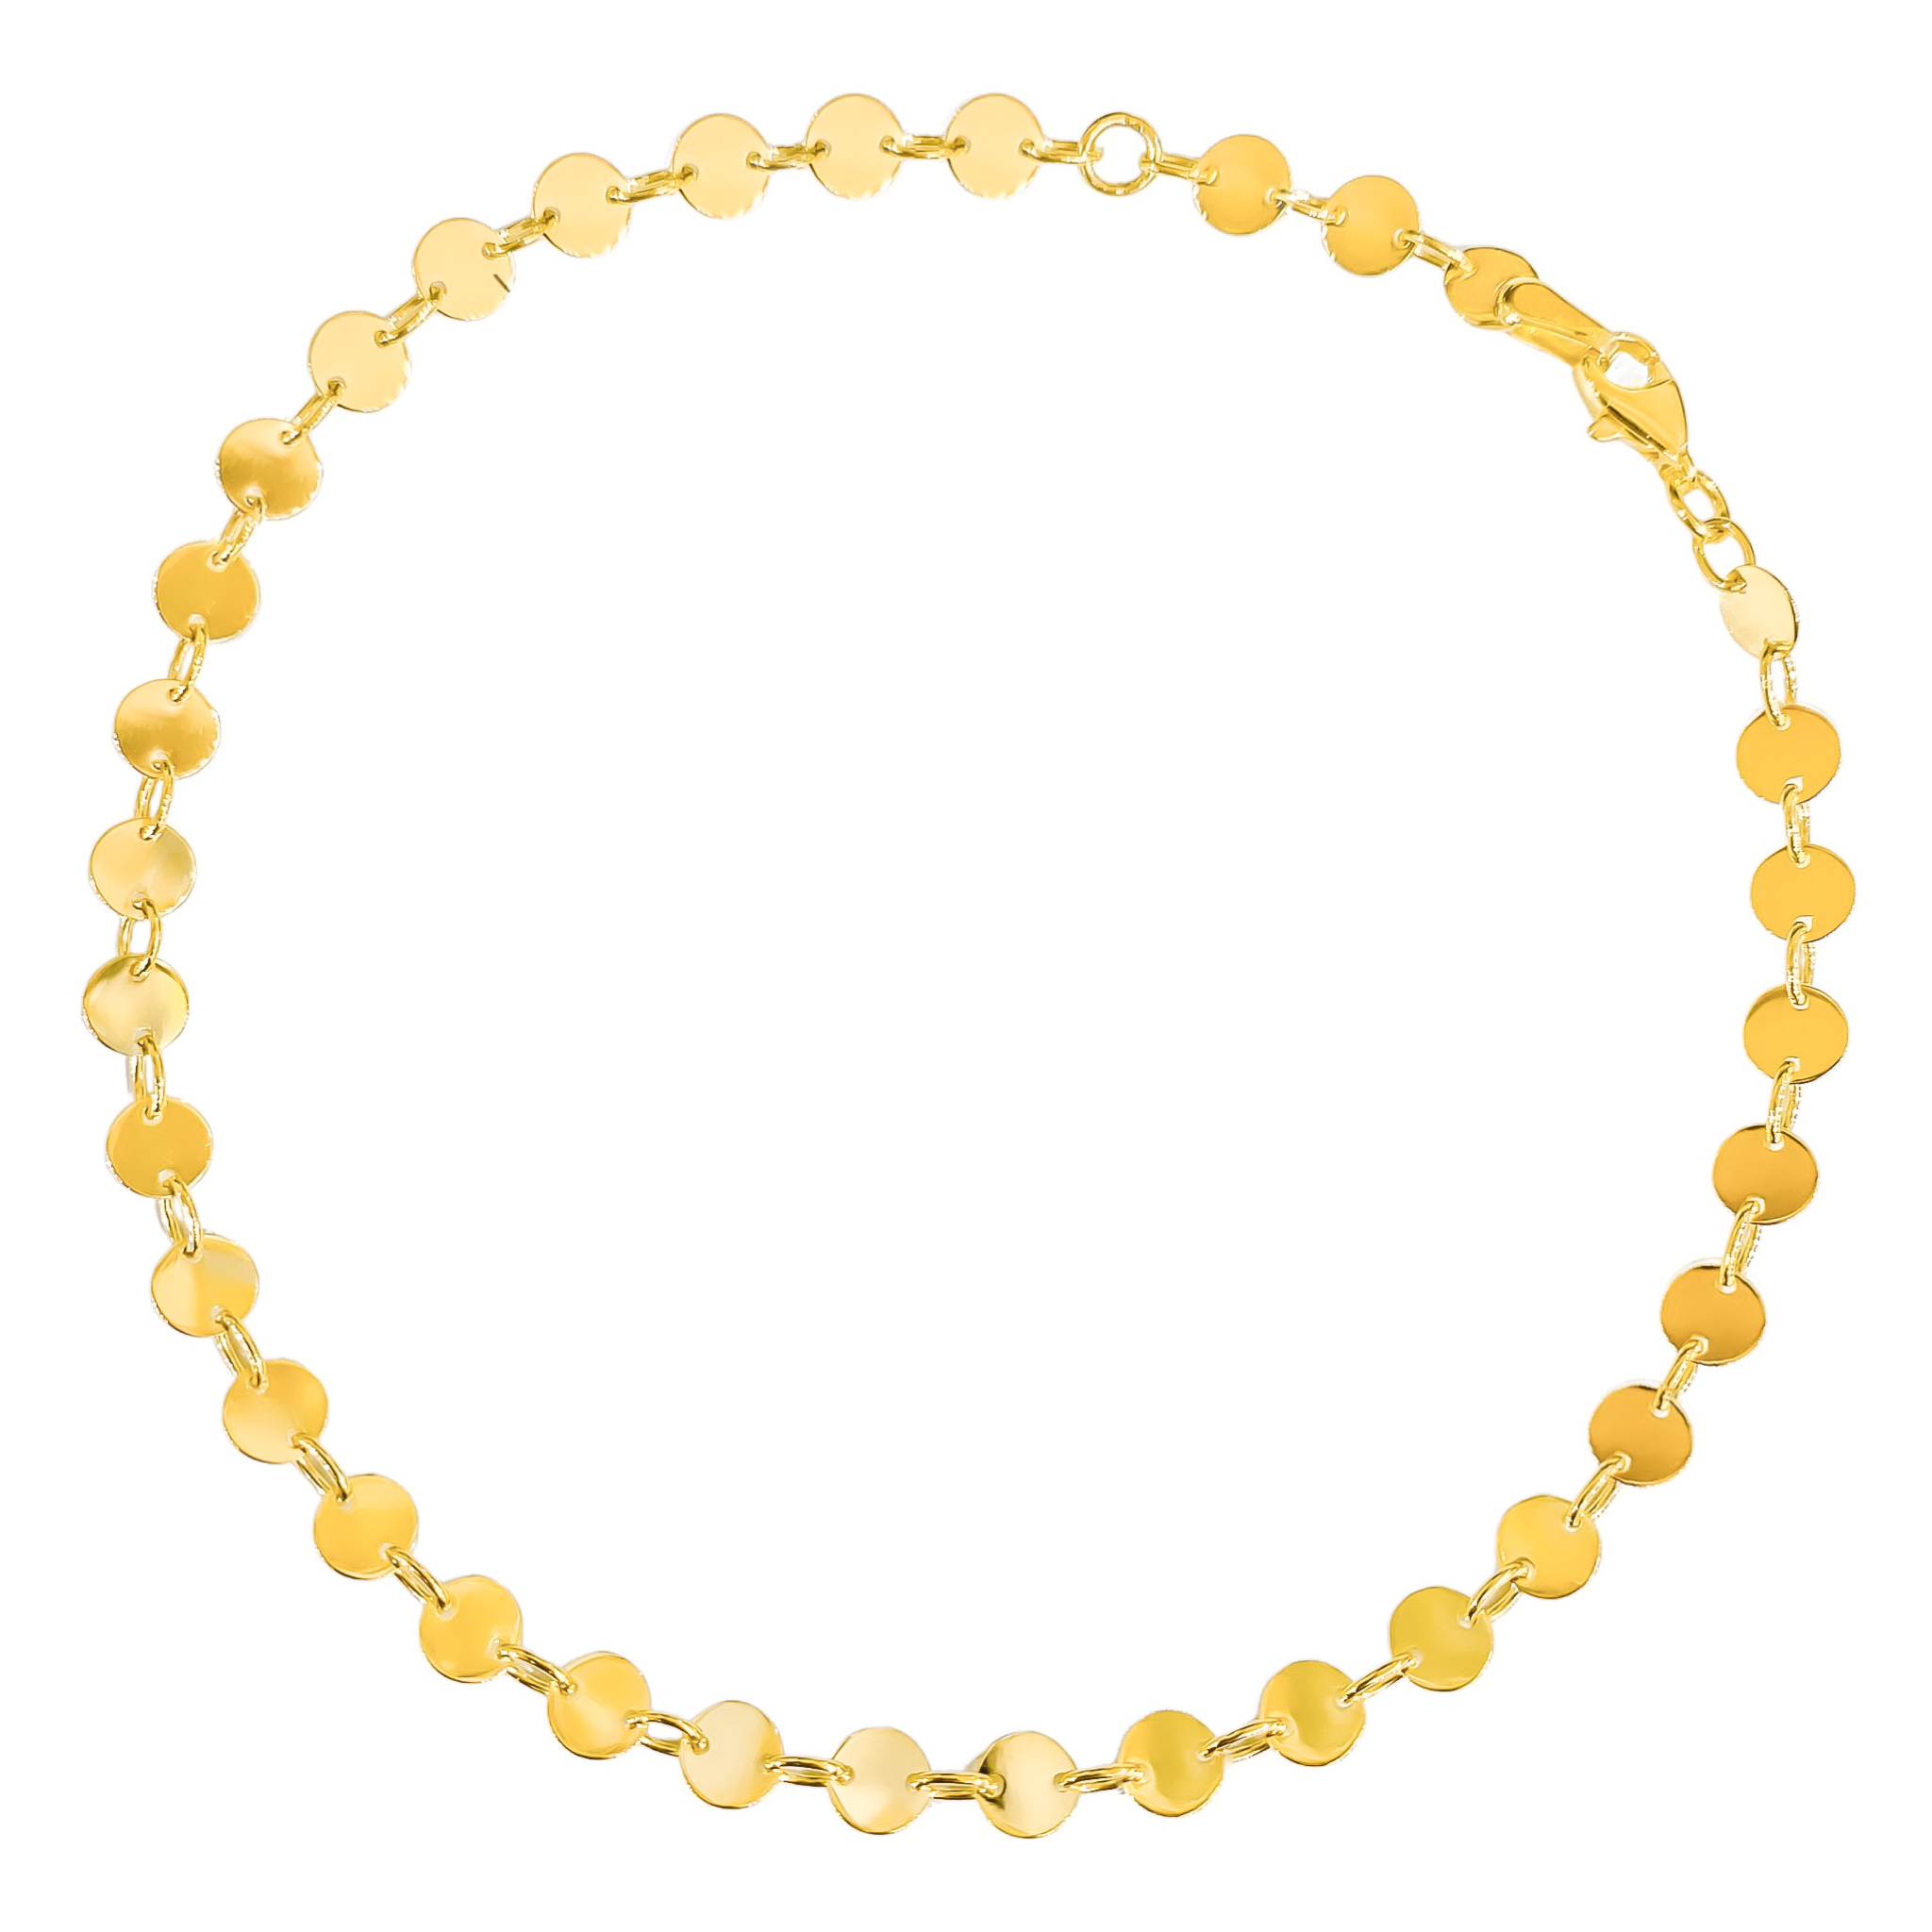 10K YELLOW GOLD DISC CHAIN ANKLET